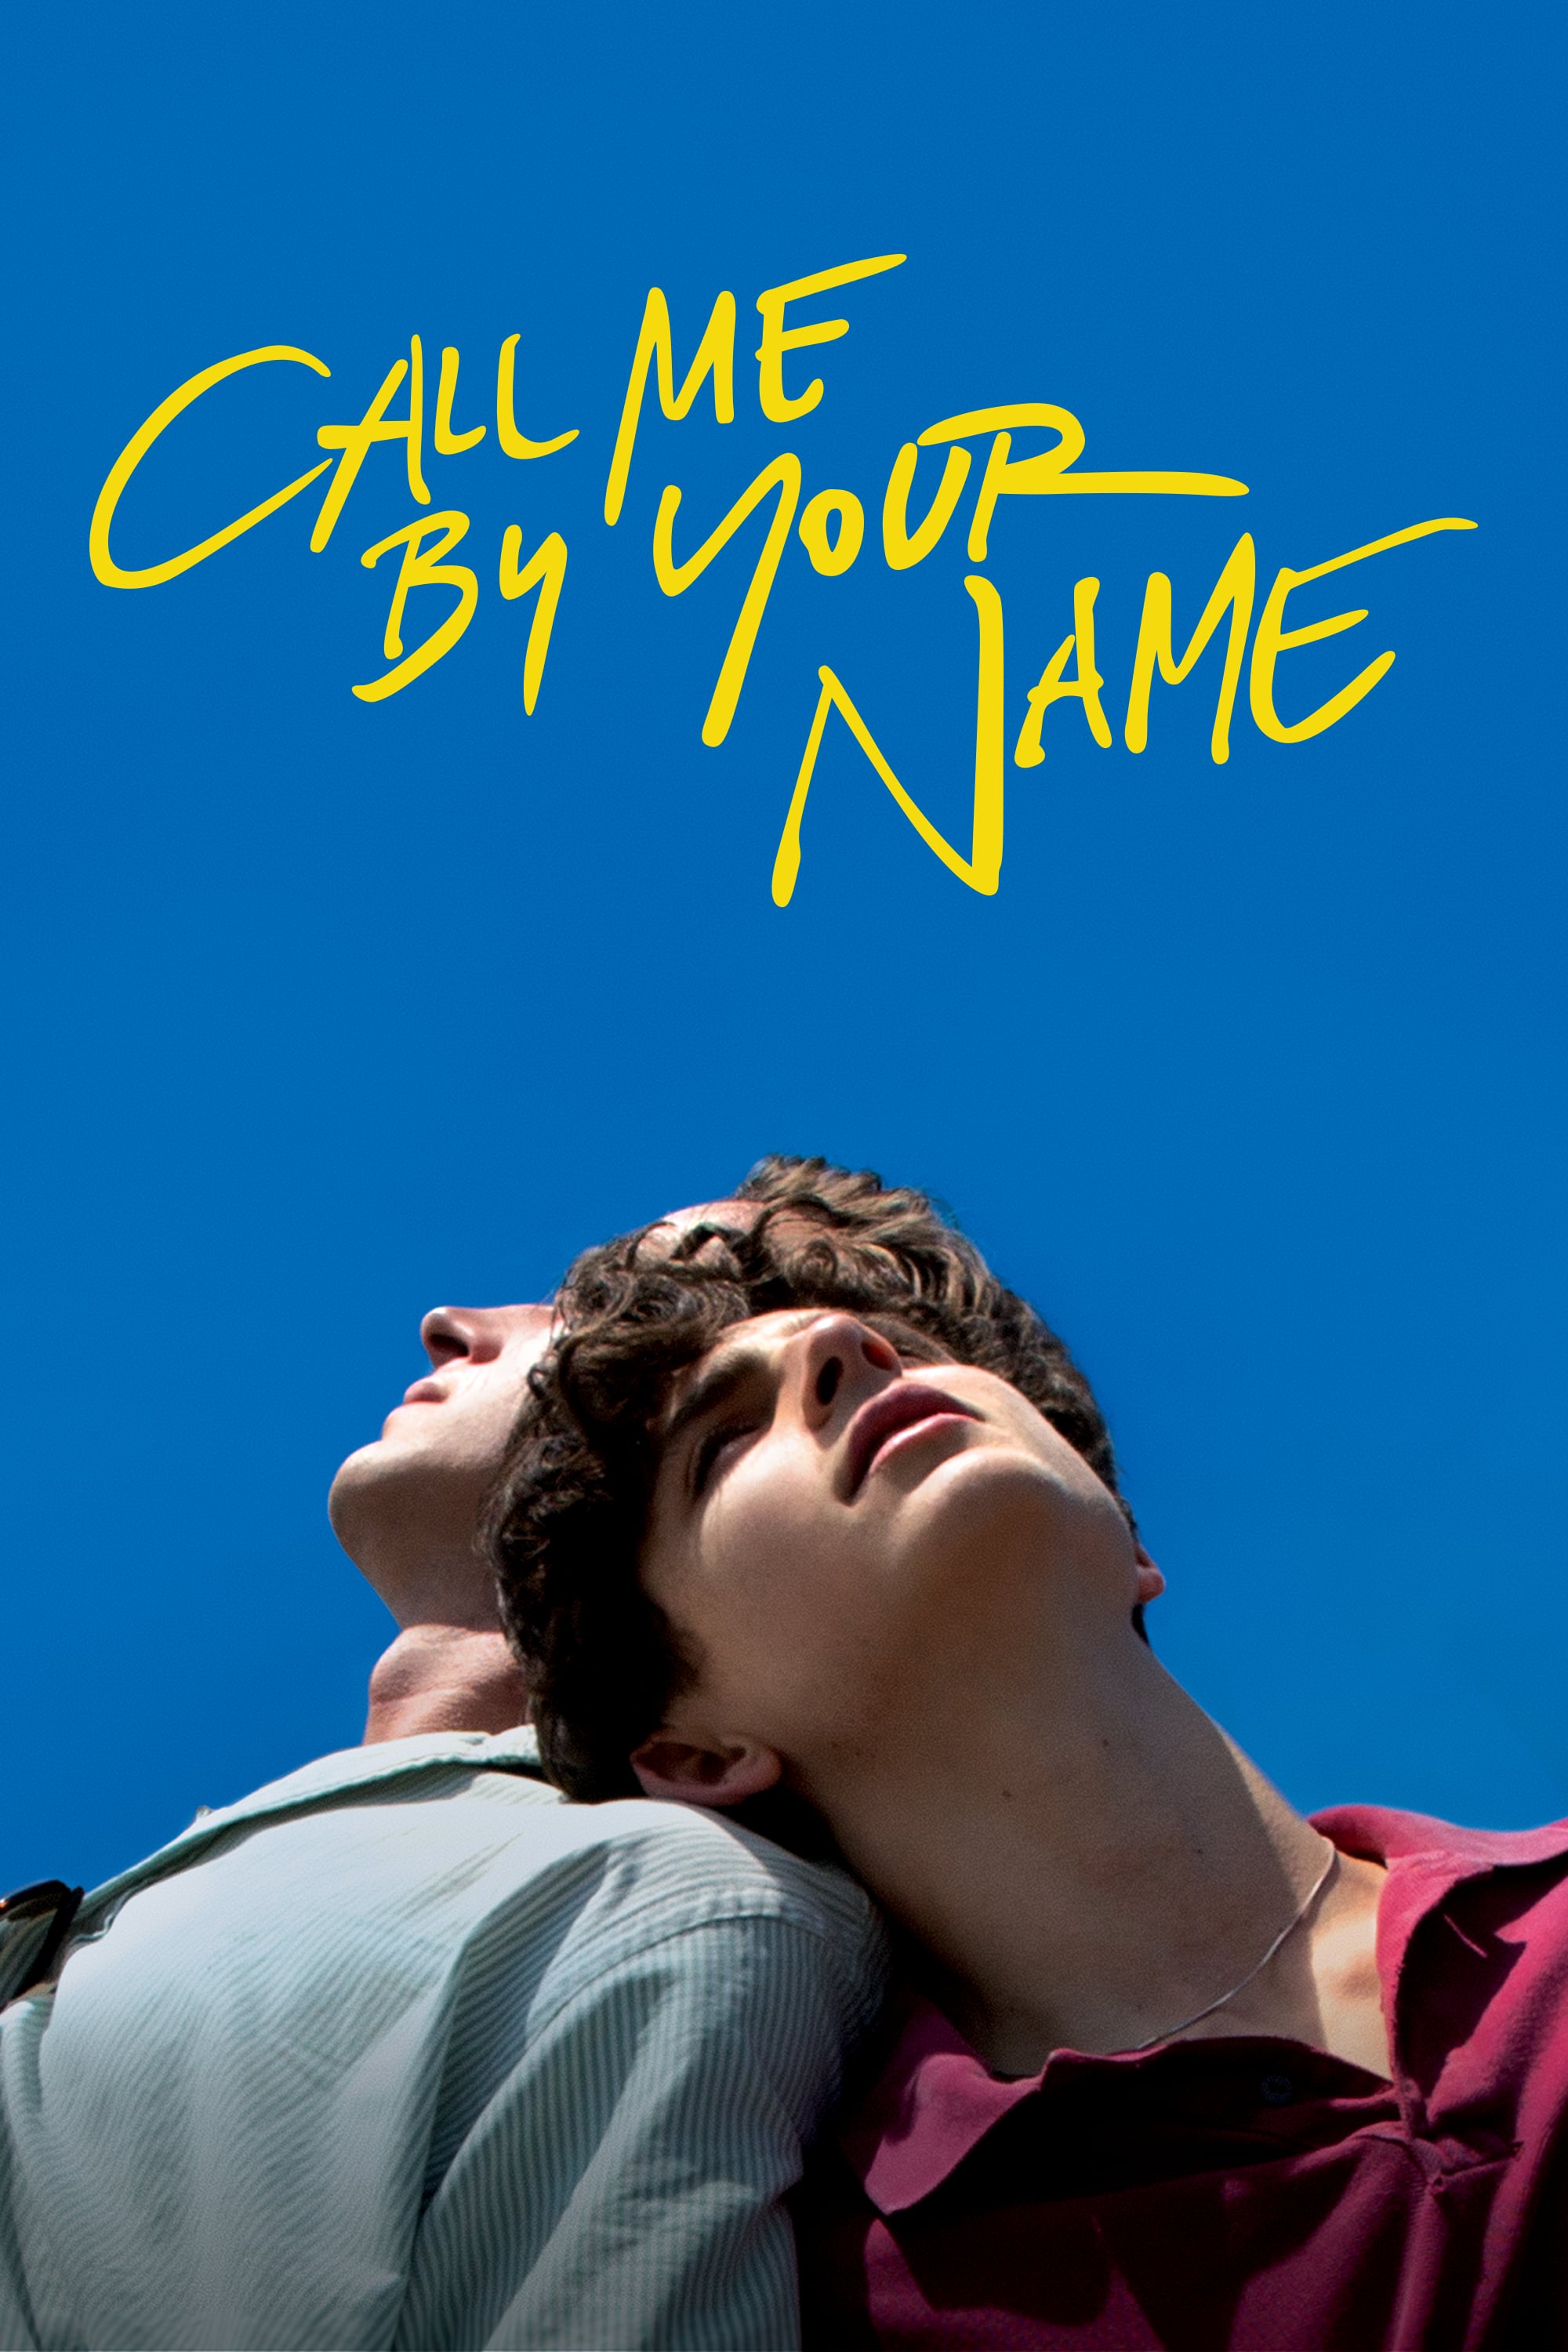 Plakat von "Call Me by Your Name"